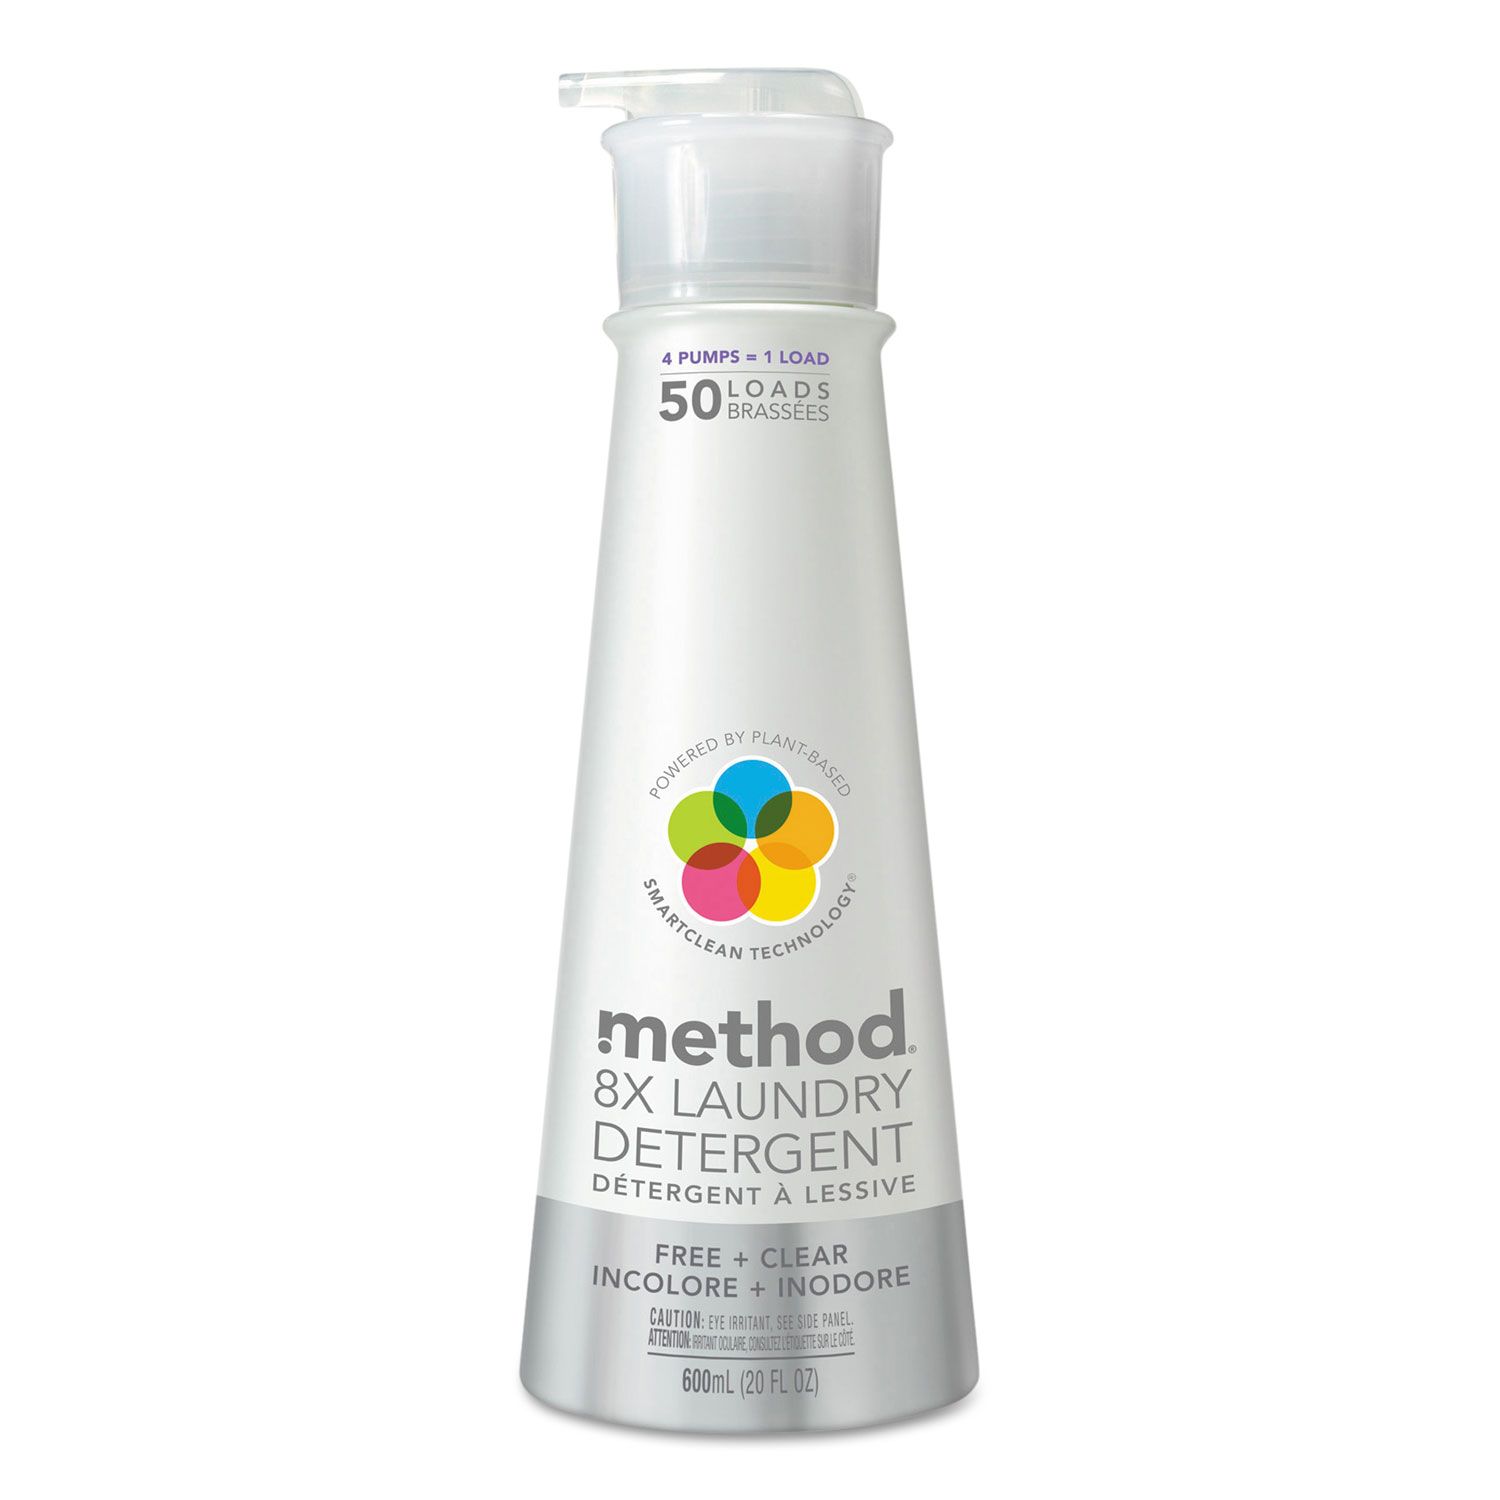  Method 01126CT 8X Laundry Detergent, Free & Clear, 20 oz Bottle, 6/Carton (MTH01126CT) 